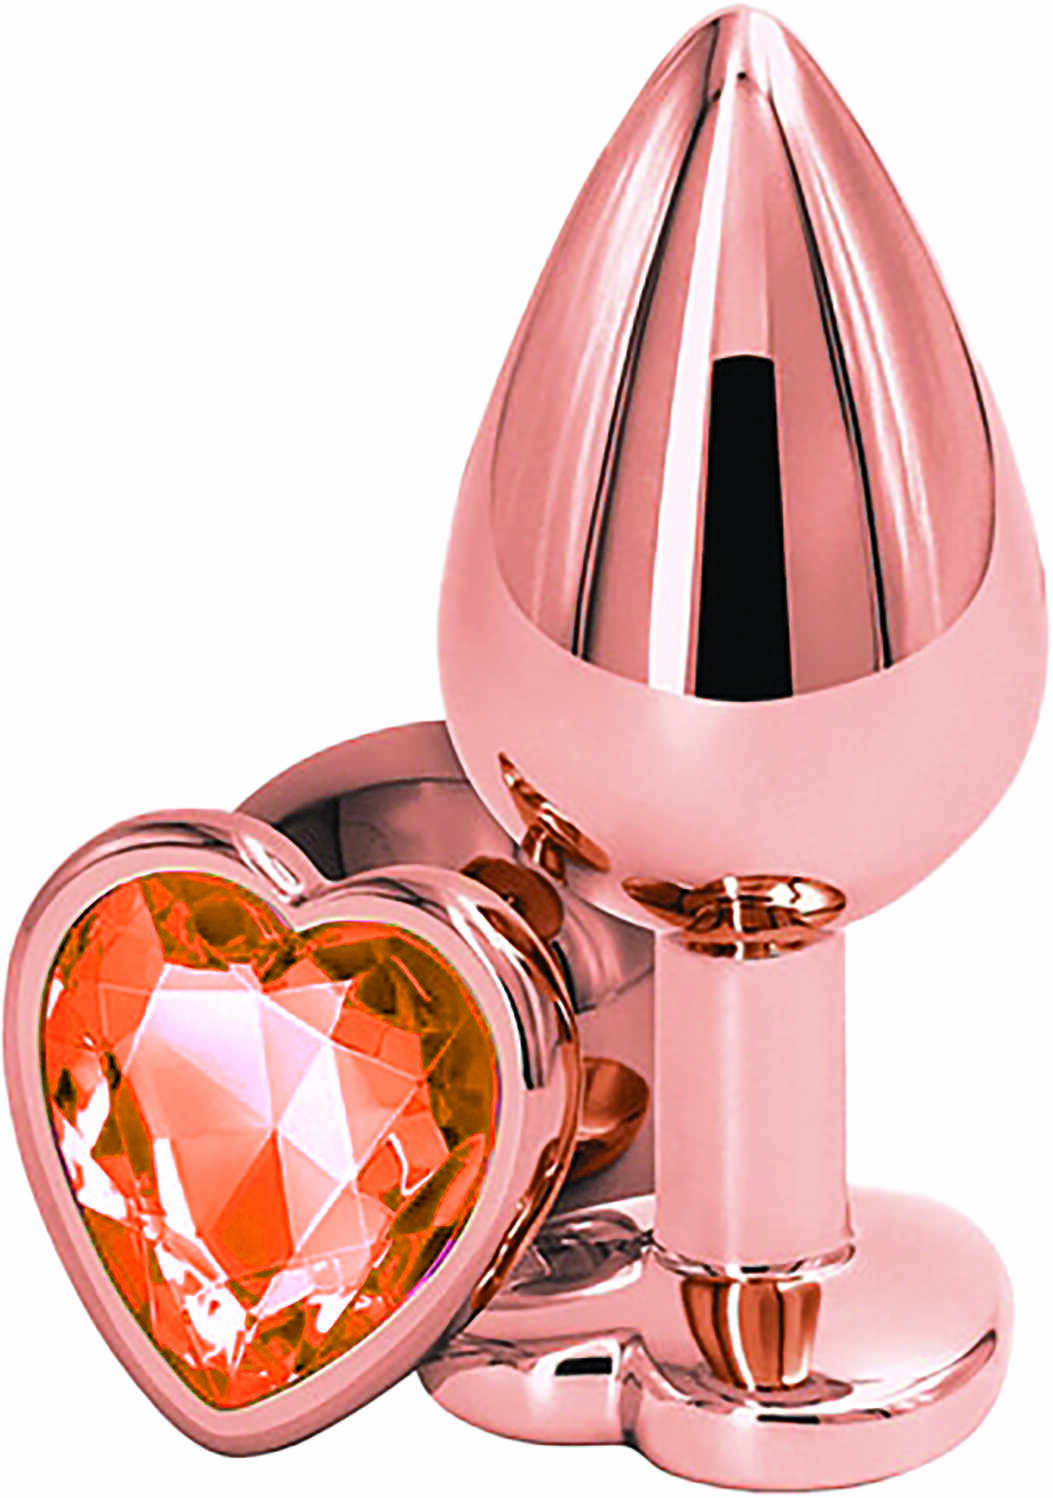 Dop Anal Brilliant Anal Plug Small, Rose Gold, Piatra Portocalie, Passion Labs